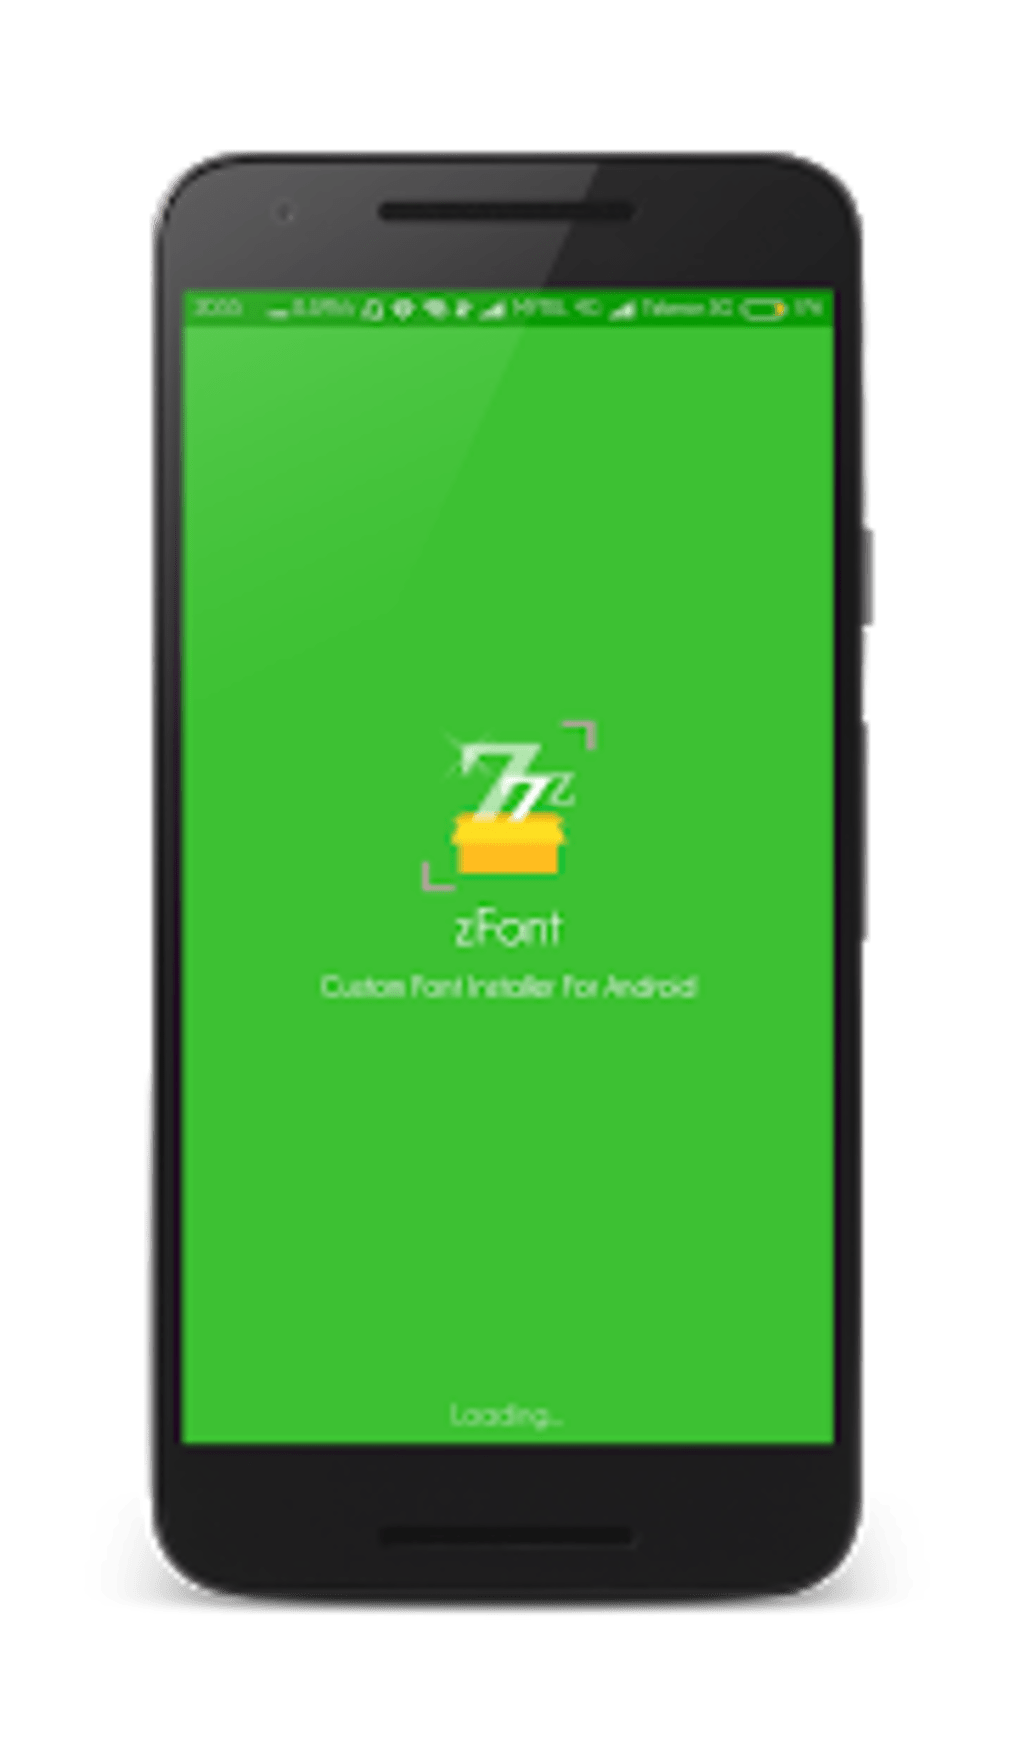 zfont - custom font installer no root apk android